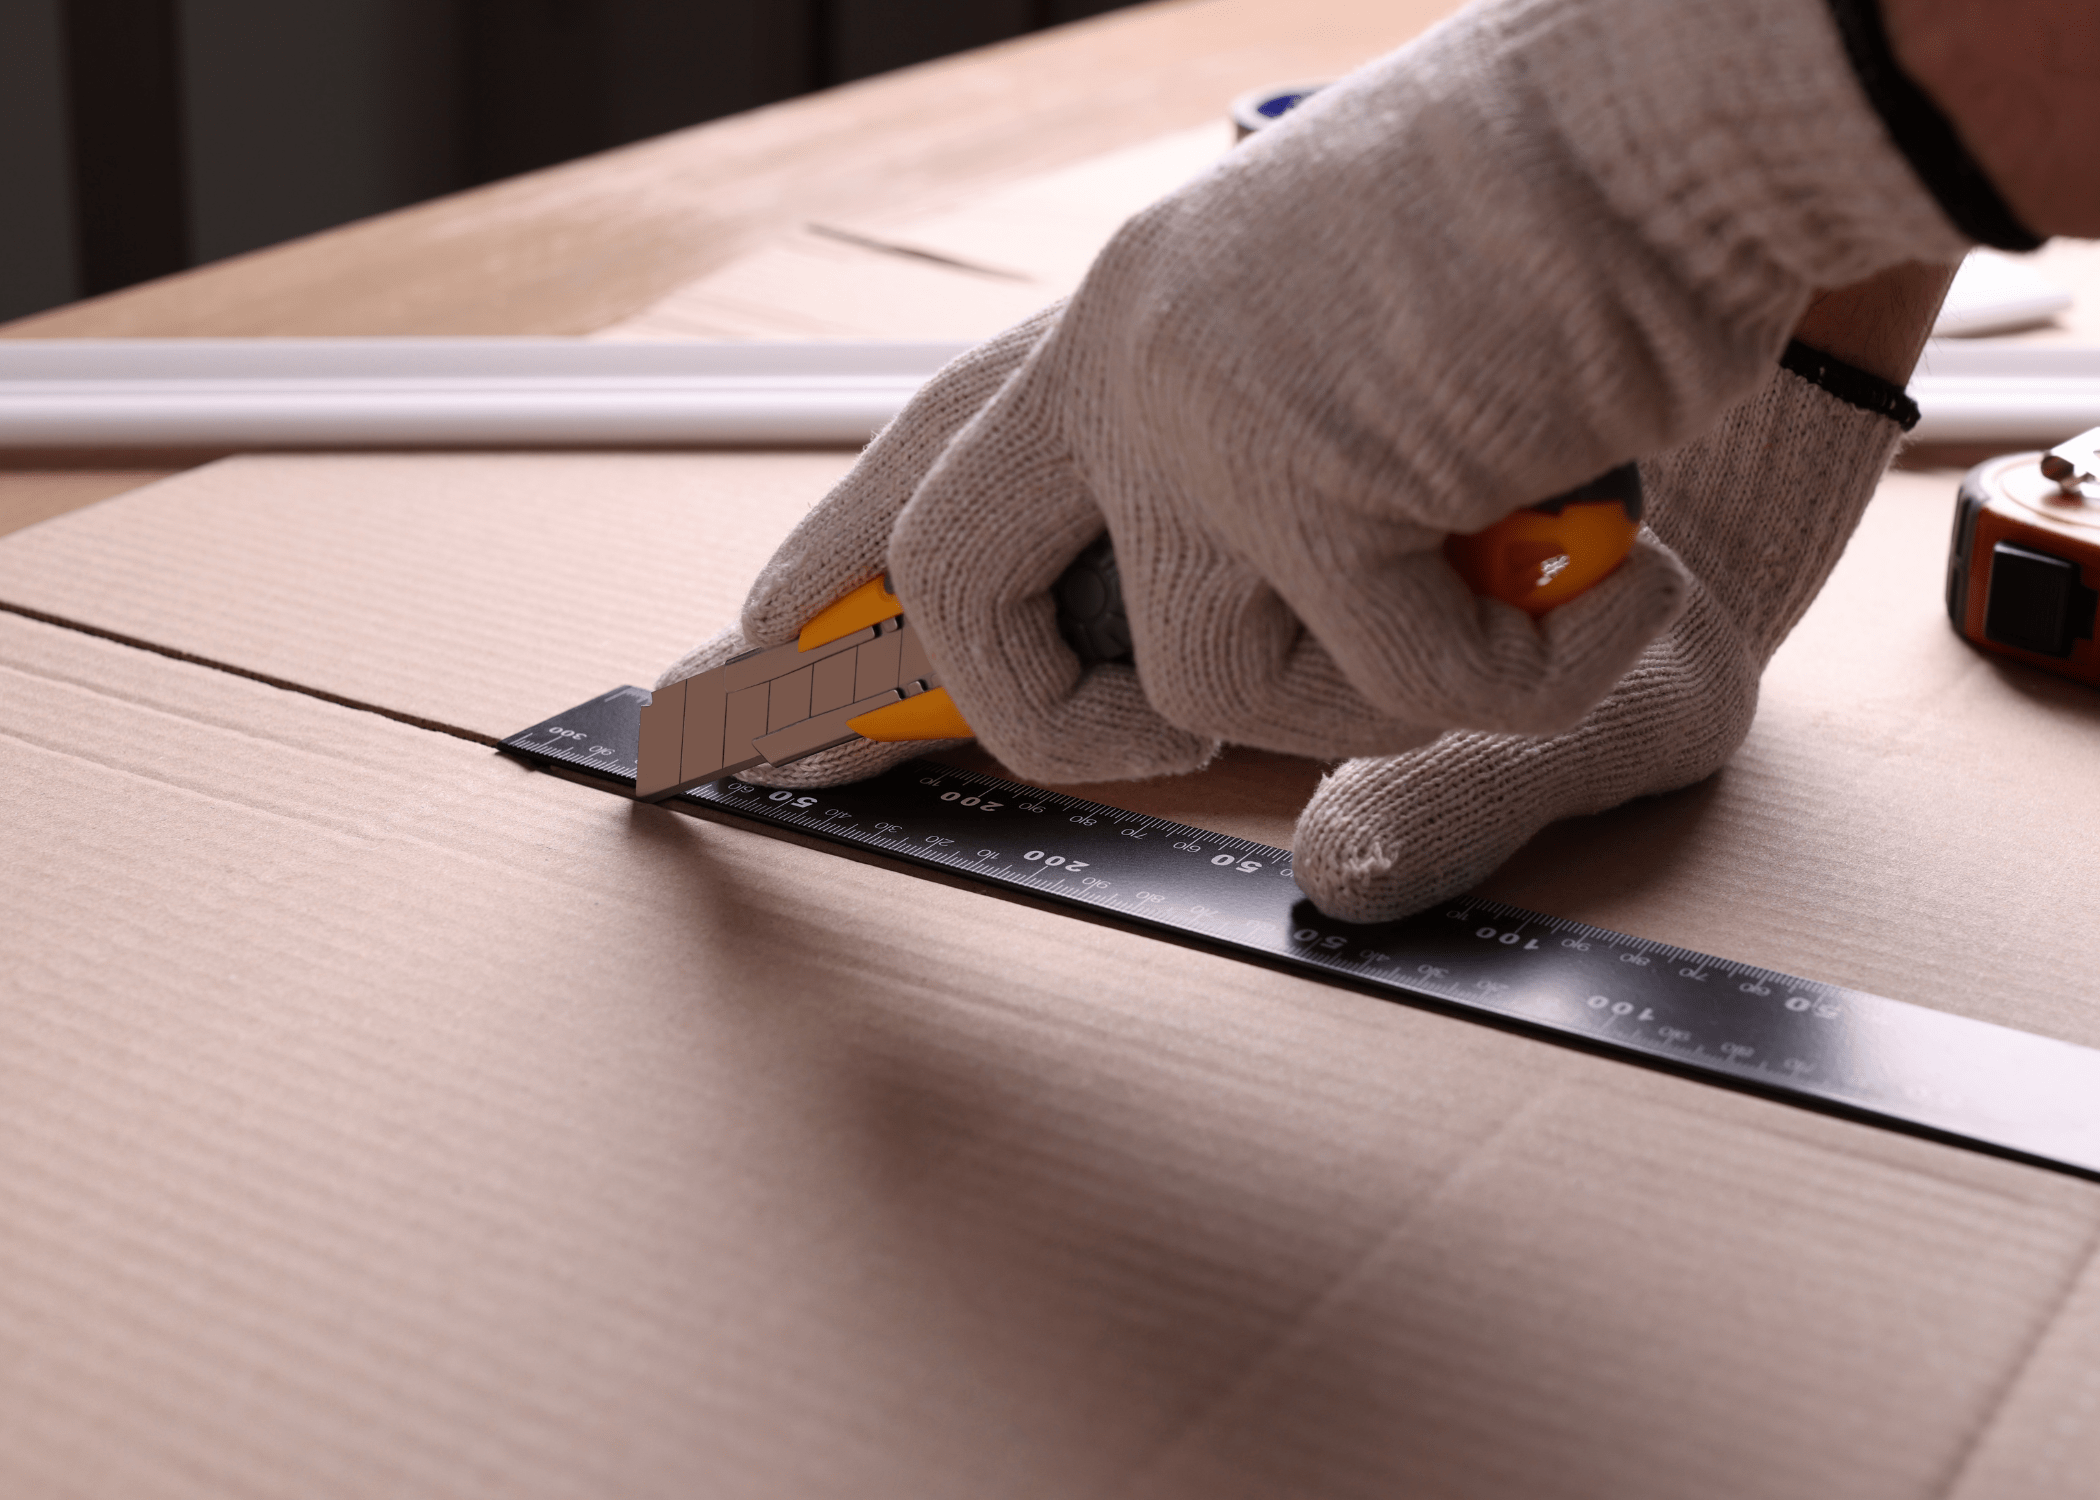 man wearing gloves cutting cardboard with a utility knife